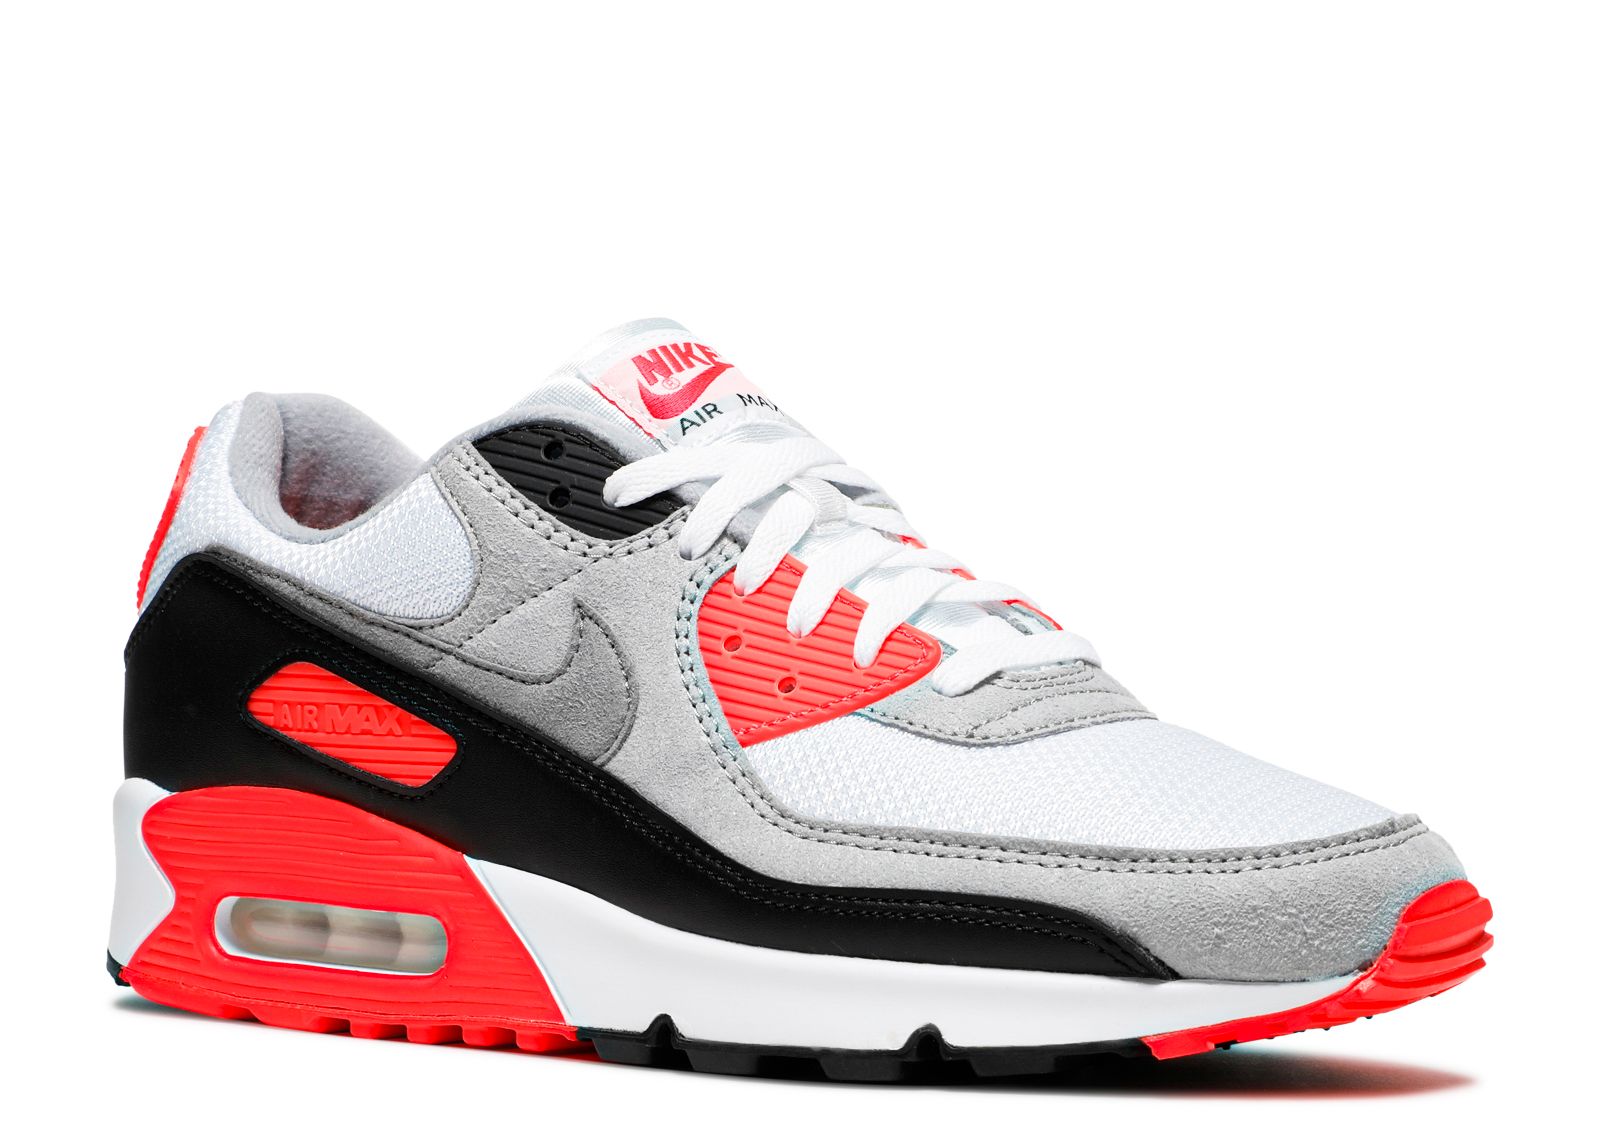 Air Max 90 'Infrared' 2020 - Nike - CT1685 100 - white/black/cool  grey/radiant red | Flight Club